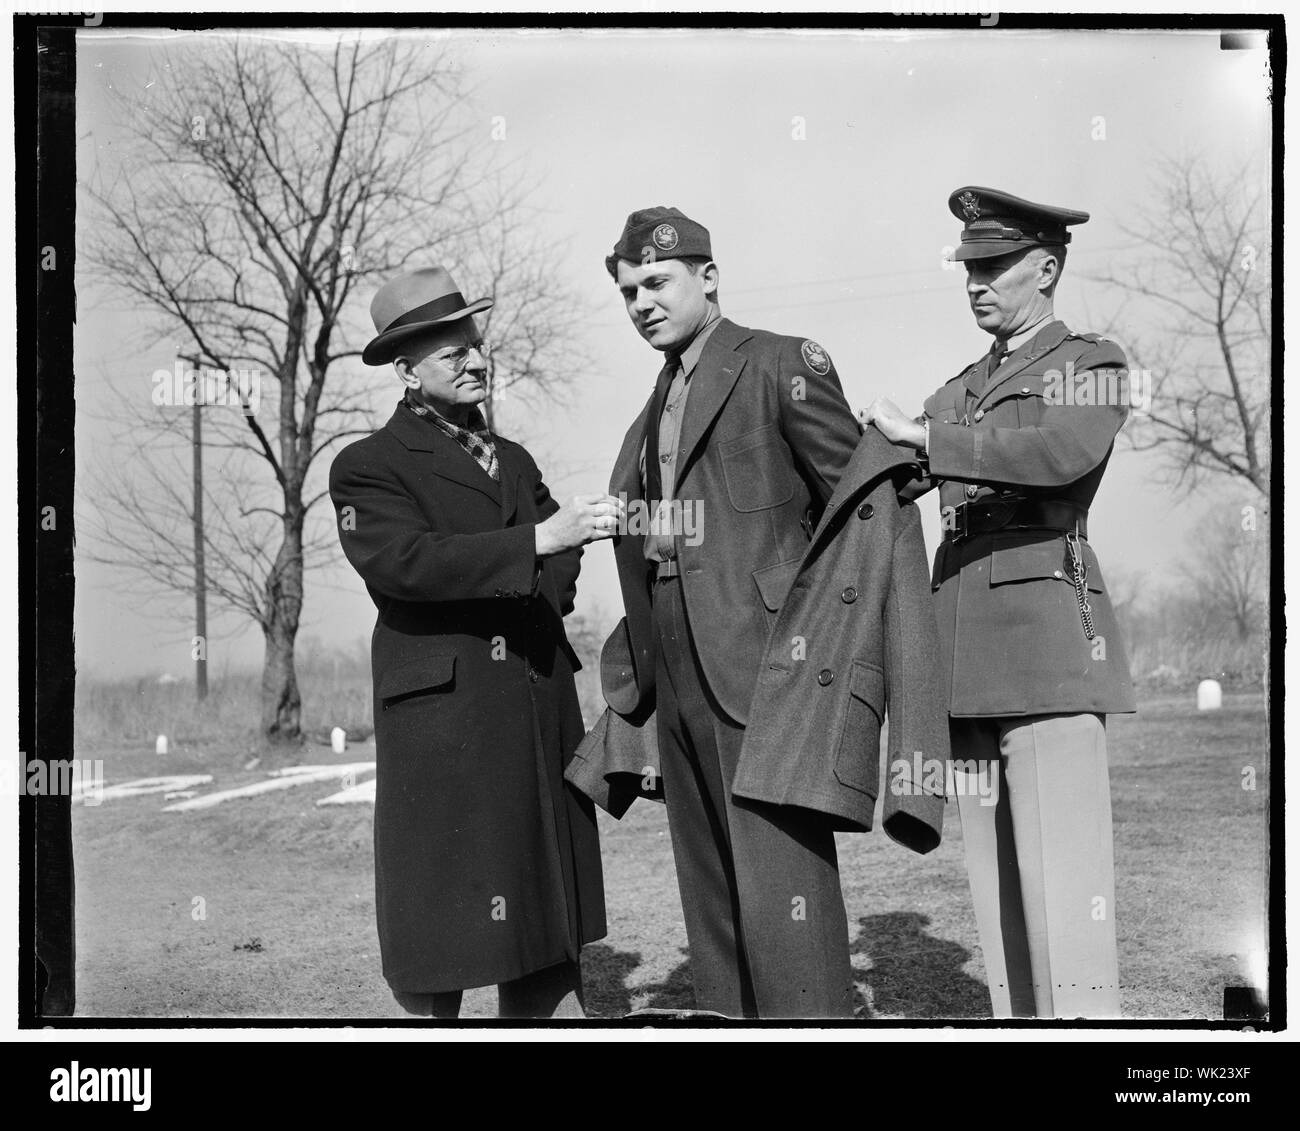 Inspects new CCC uniform. Washington, D.C., Feb. 1. Robert E. Fechner, left, Director of the Civilian Conservation Corps, inspecting the new uniform issued to members of the Corps for the first time today. The outfit consists of a two-button pleated back, sack coat of spruce green topped off with new style overseas cap and a red an yellow CCC insignia on left shoulder. Frank Papuga is wearing uniform while on right is Lt. Col. Thomson Lawrence, in command of Central District, 3rd. corps area Stock Photo